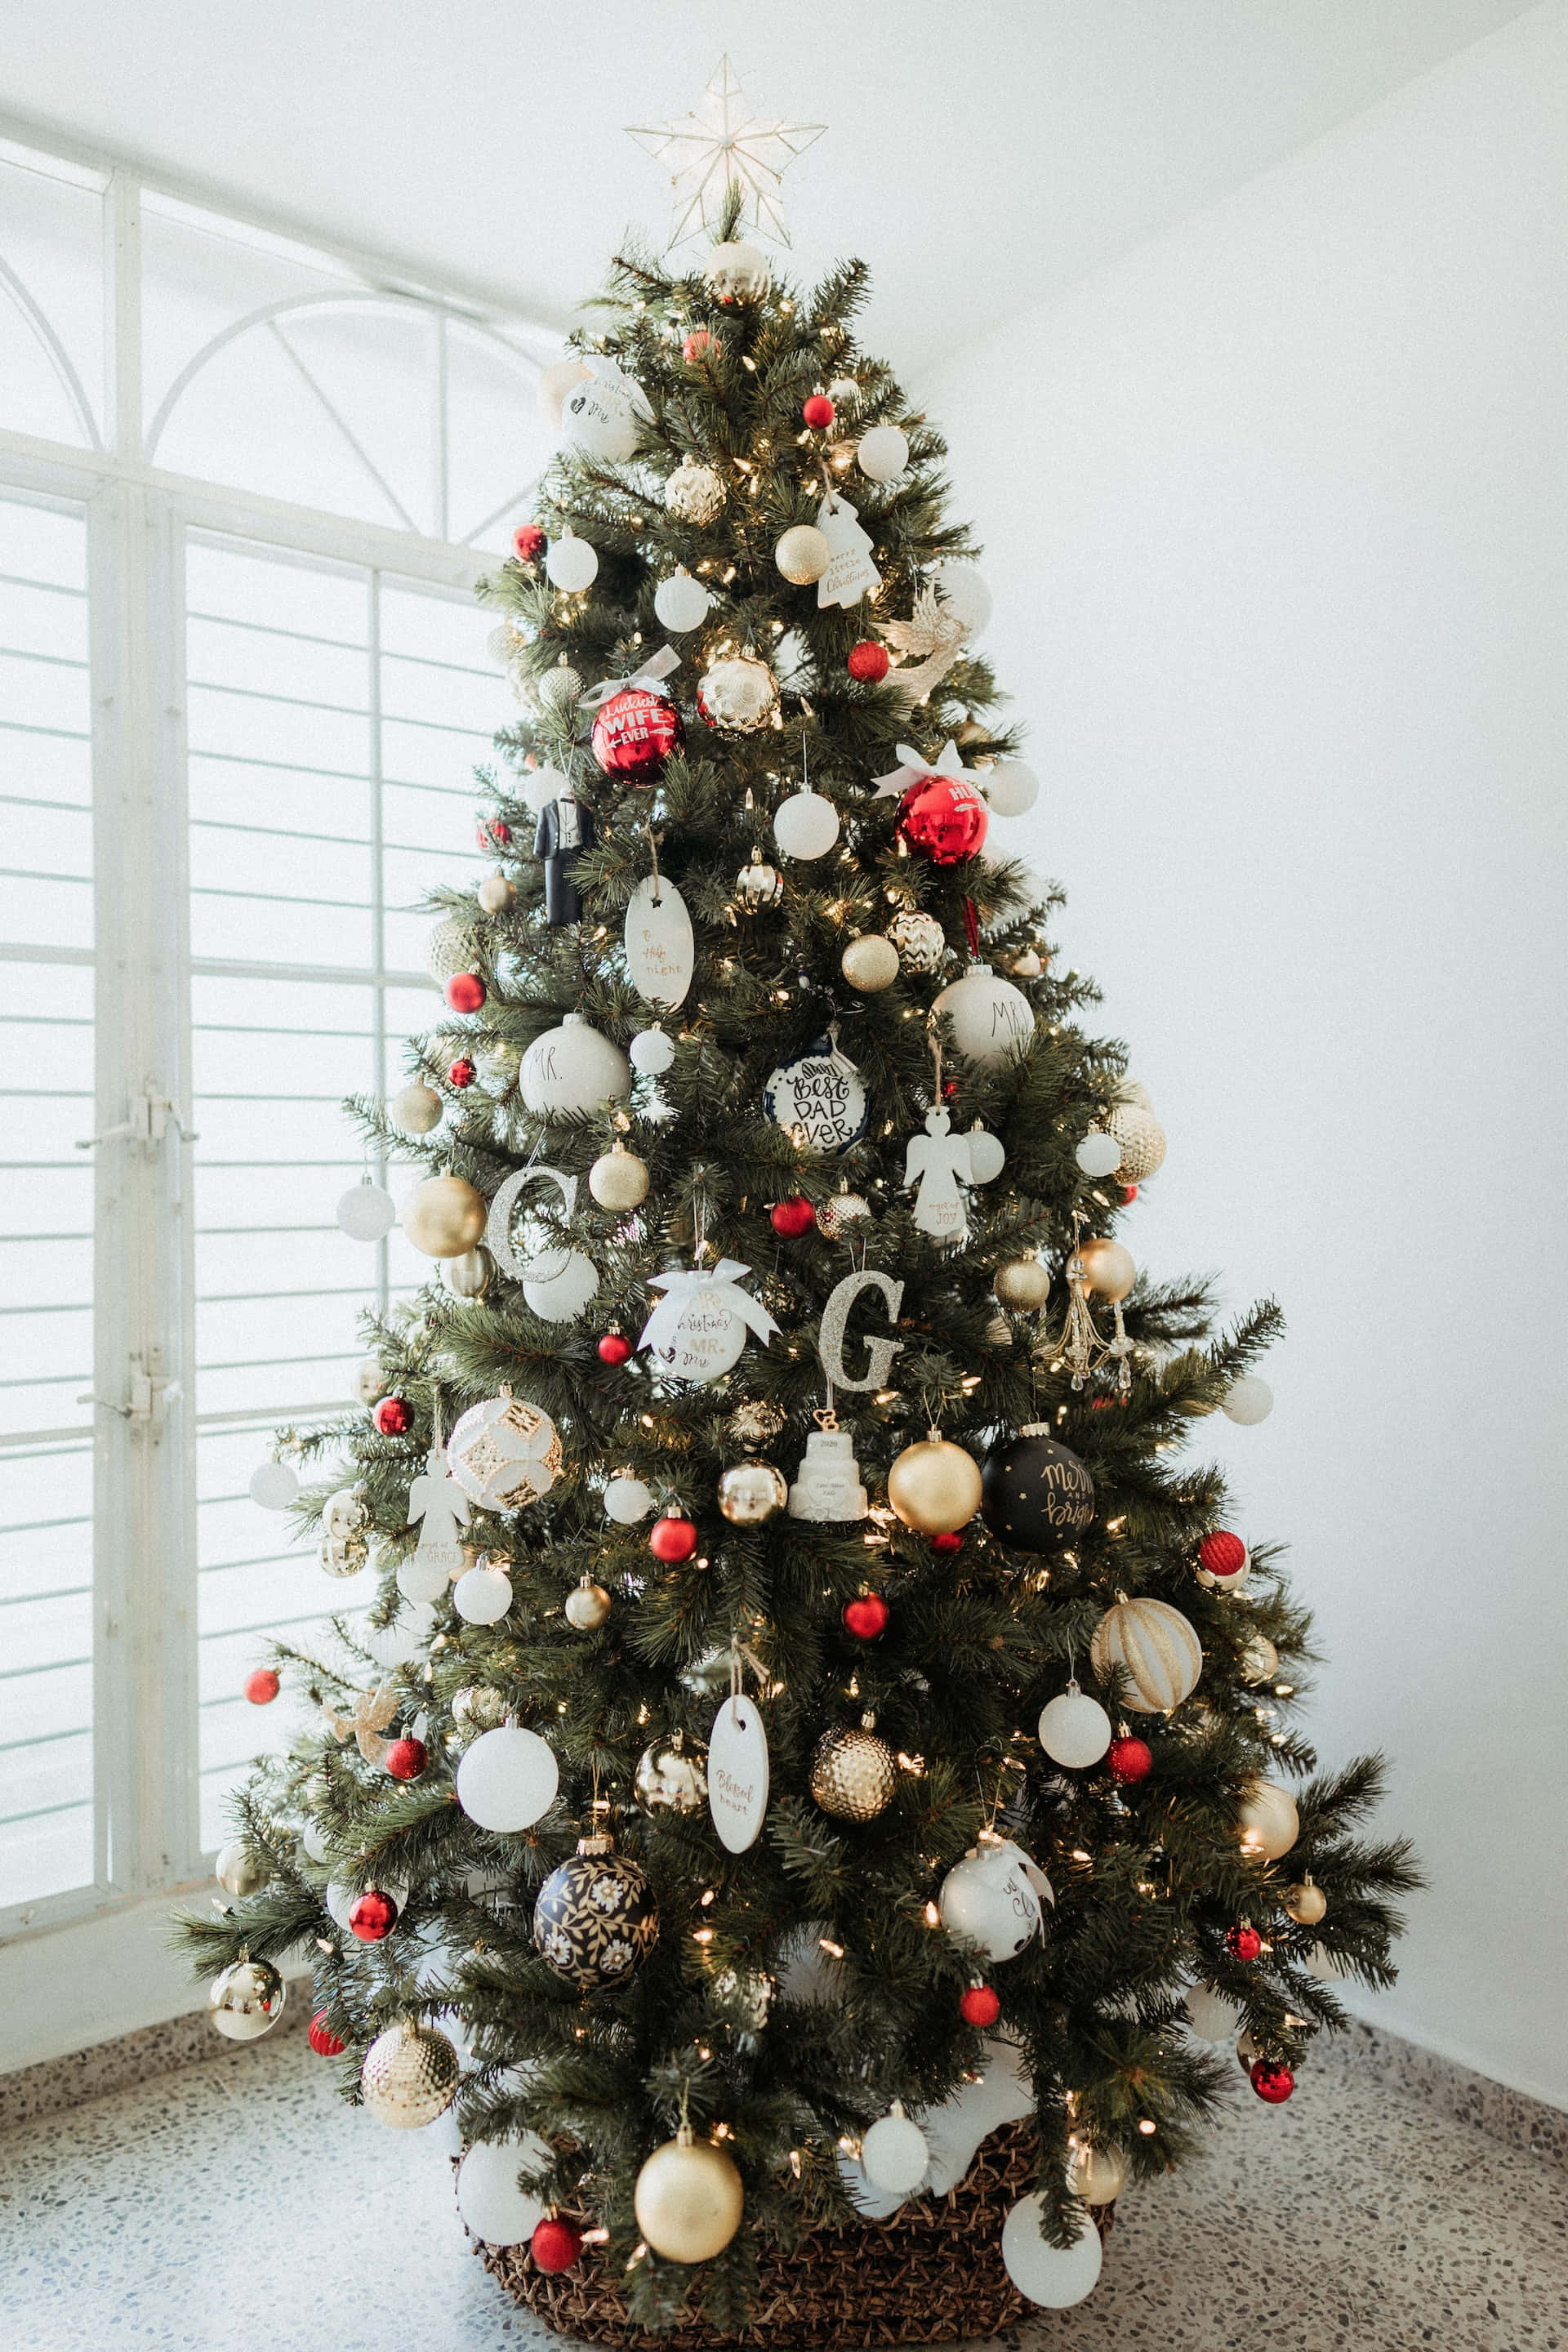 A Bright and Beautiful Christmas Tree to Brighten Your Holidays Wallpaper